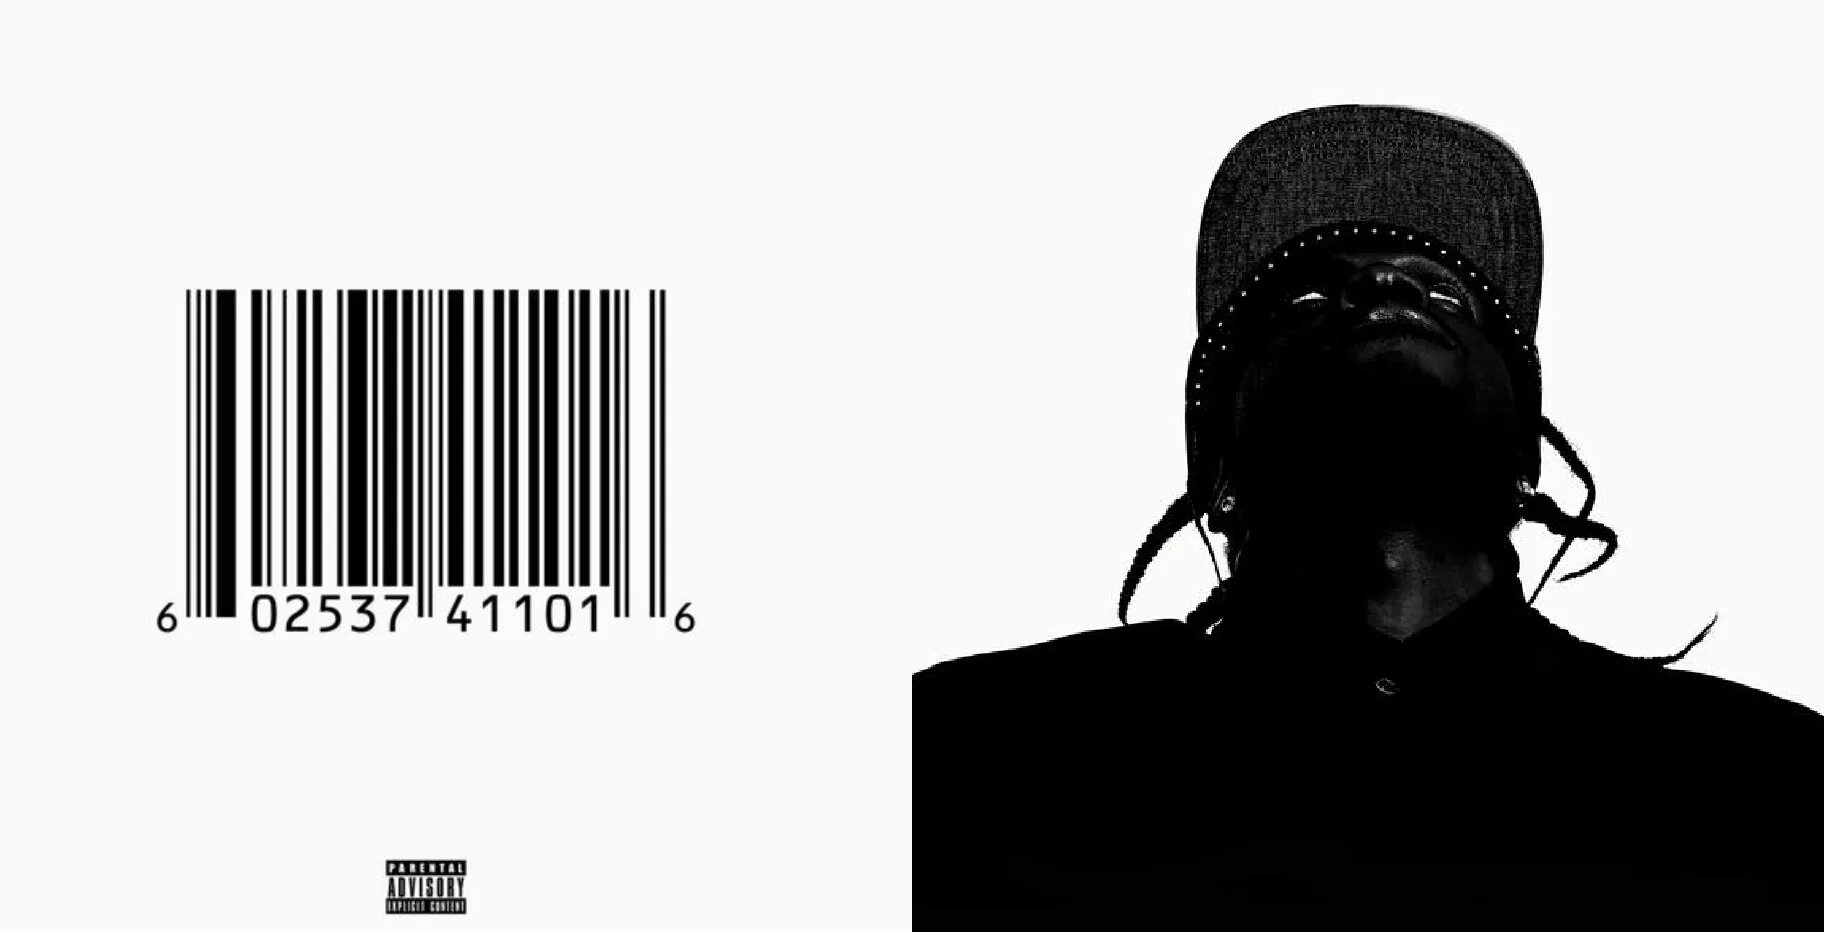 My name is my name Pusha t. Pusha t обложка. Обложка альбома Pusha t. Обложка альбома Минимализм. Pusha t feat